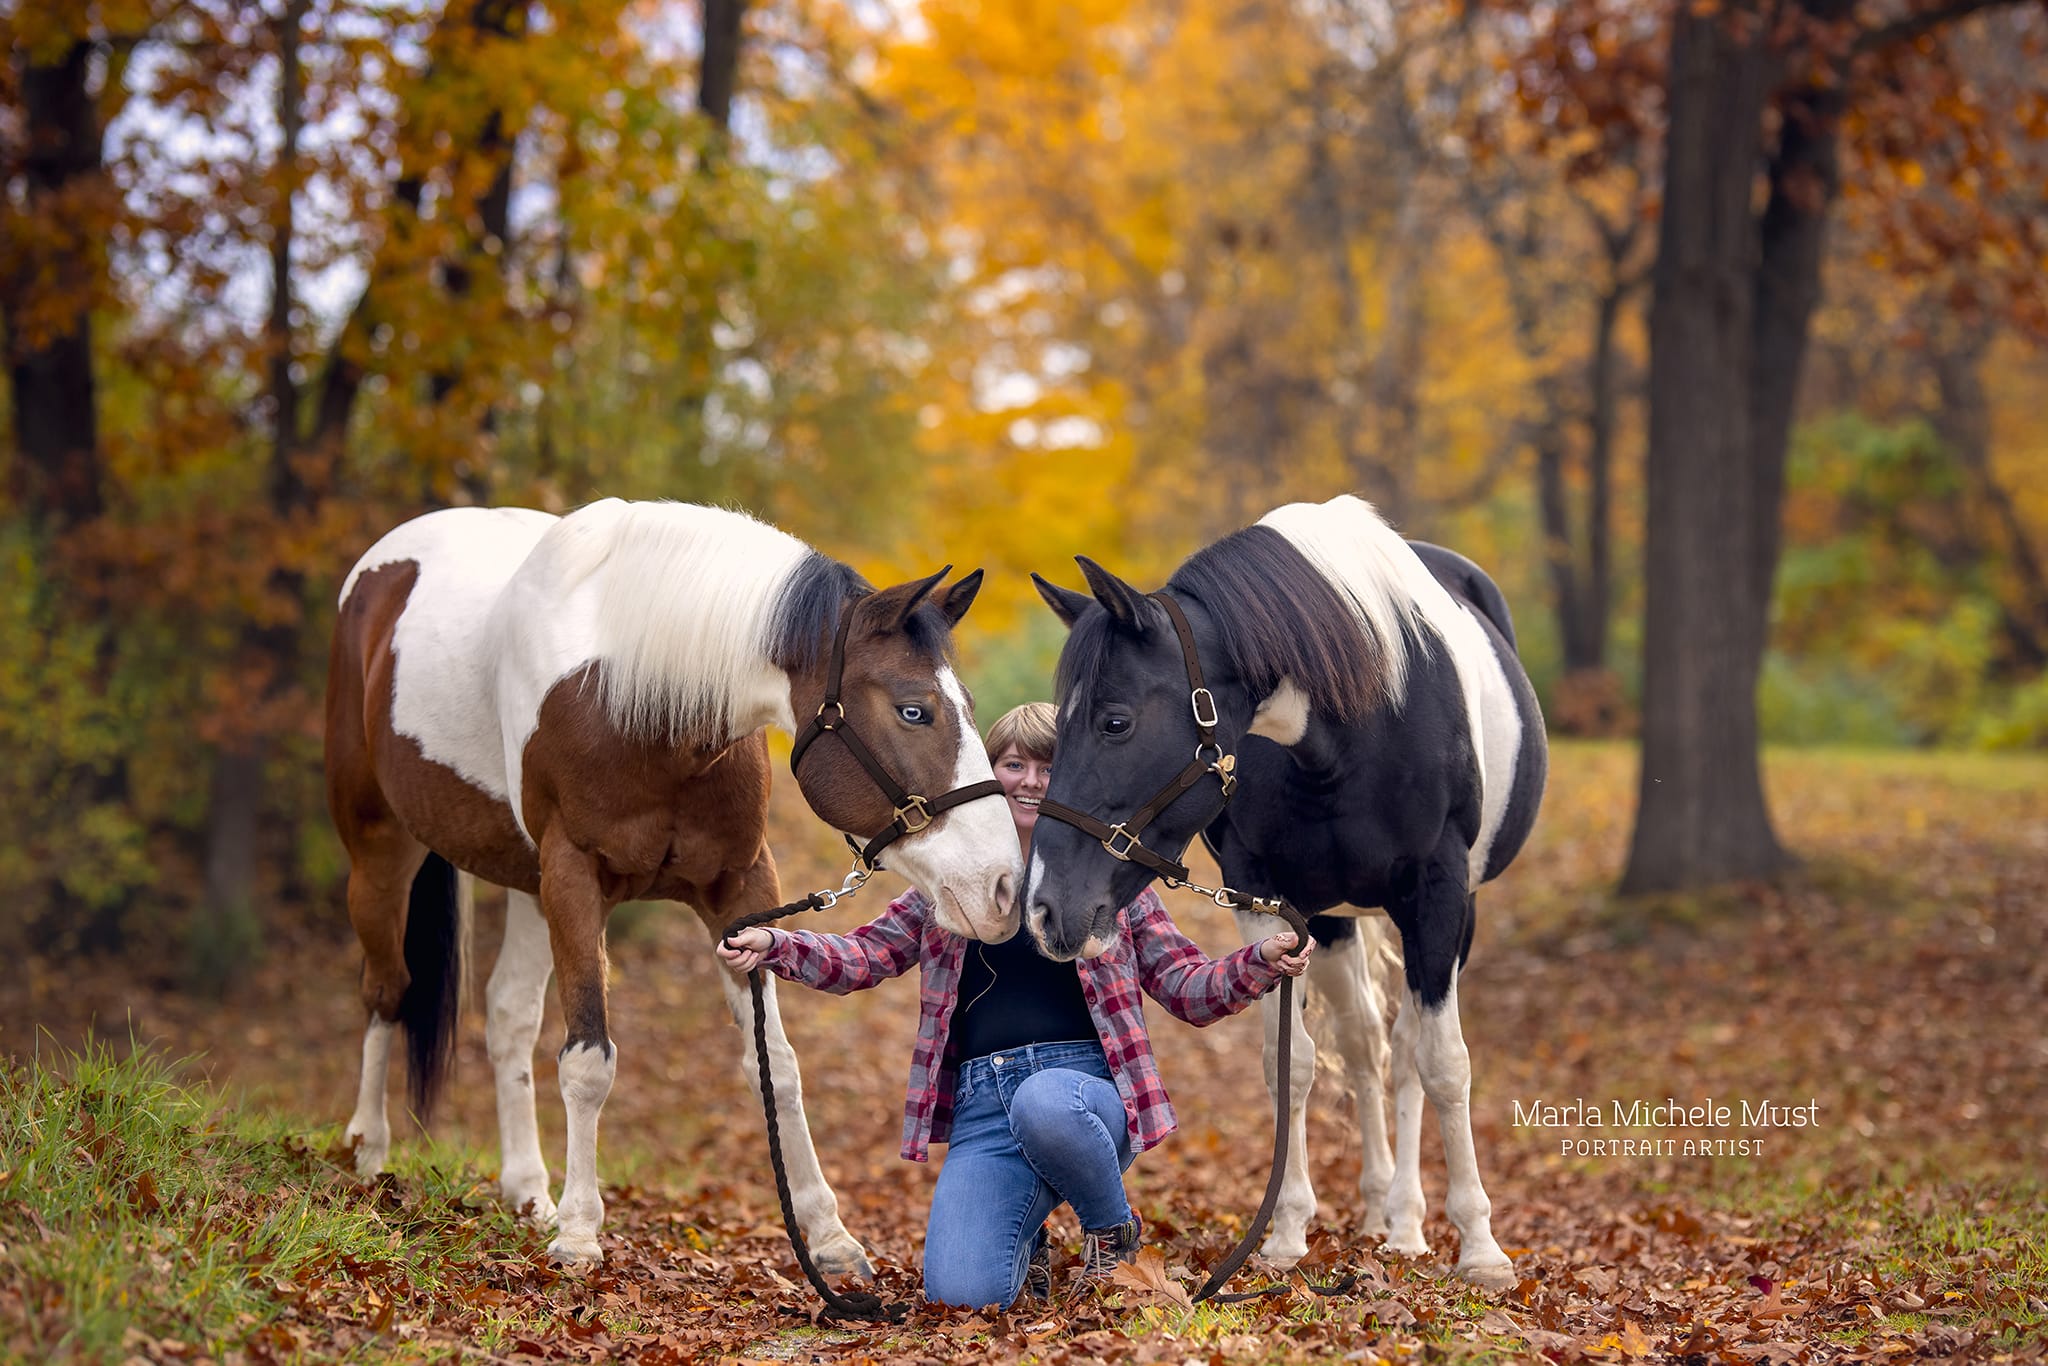 Detroit horse photographer's shot: Horse owner knelt down while holding the reins of two horses, guiding them along a trail.